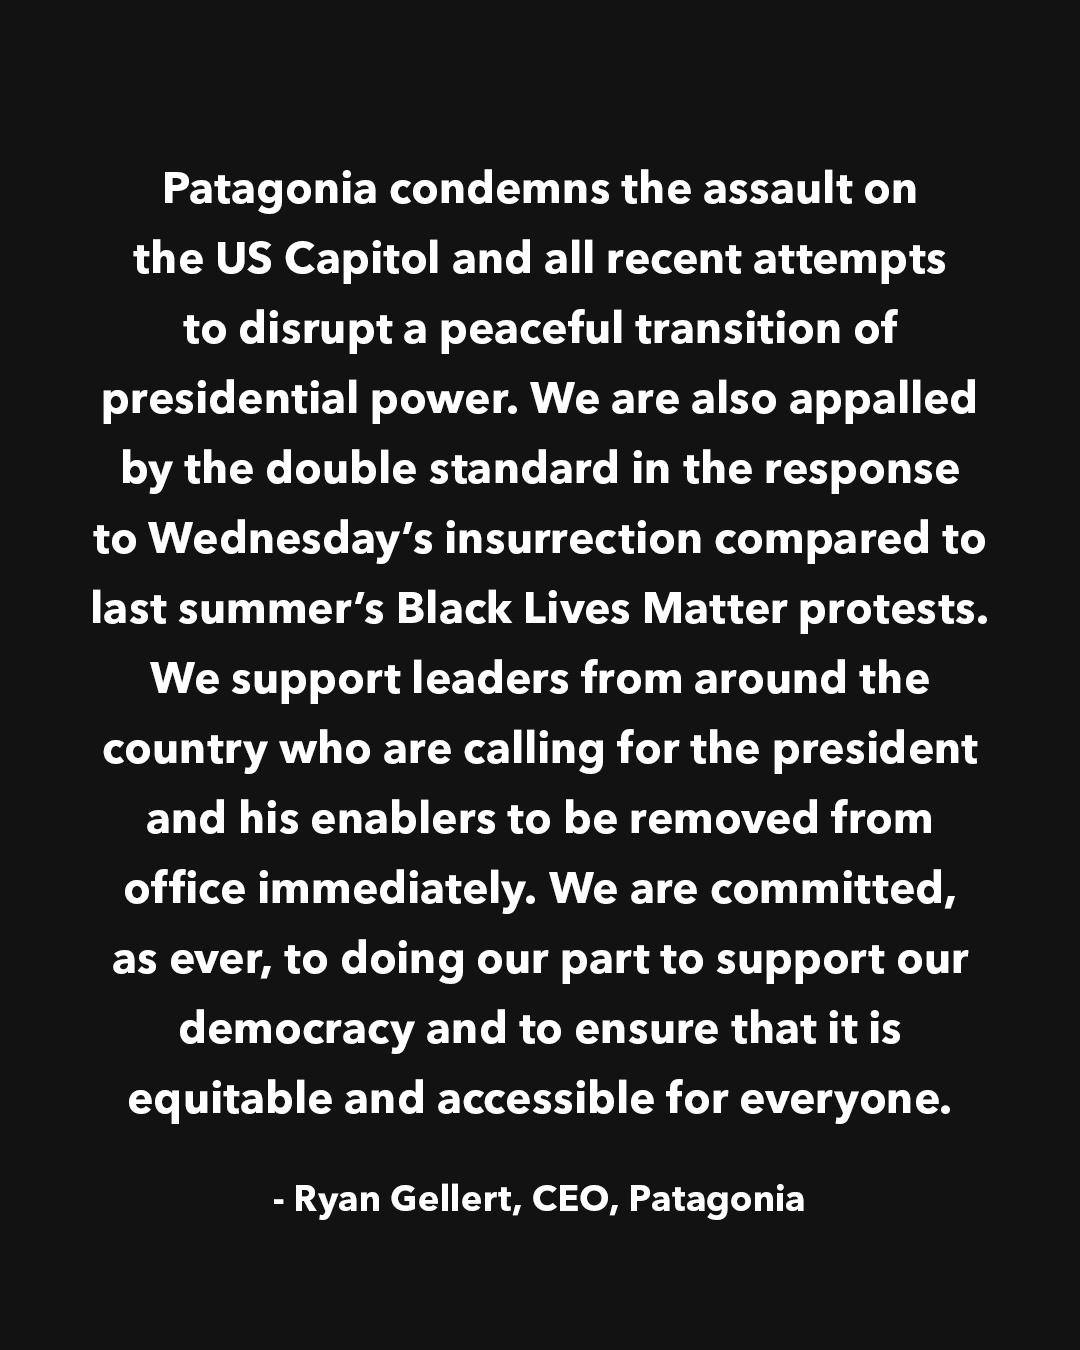 Patagonia condemns the assault on the US Capitol and all recent attempts to disrupt a peaceful transition of presidential power